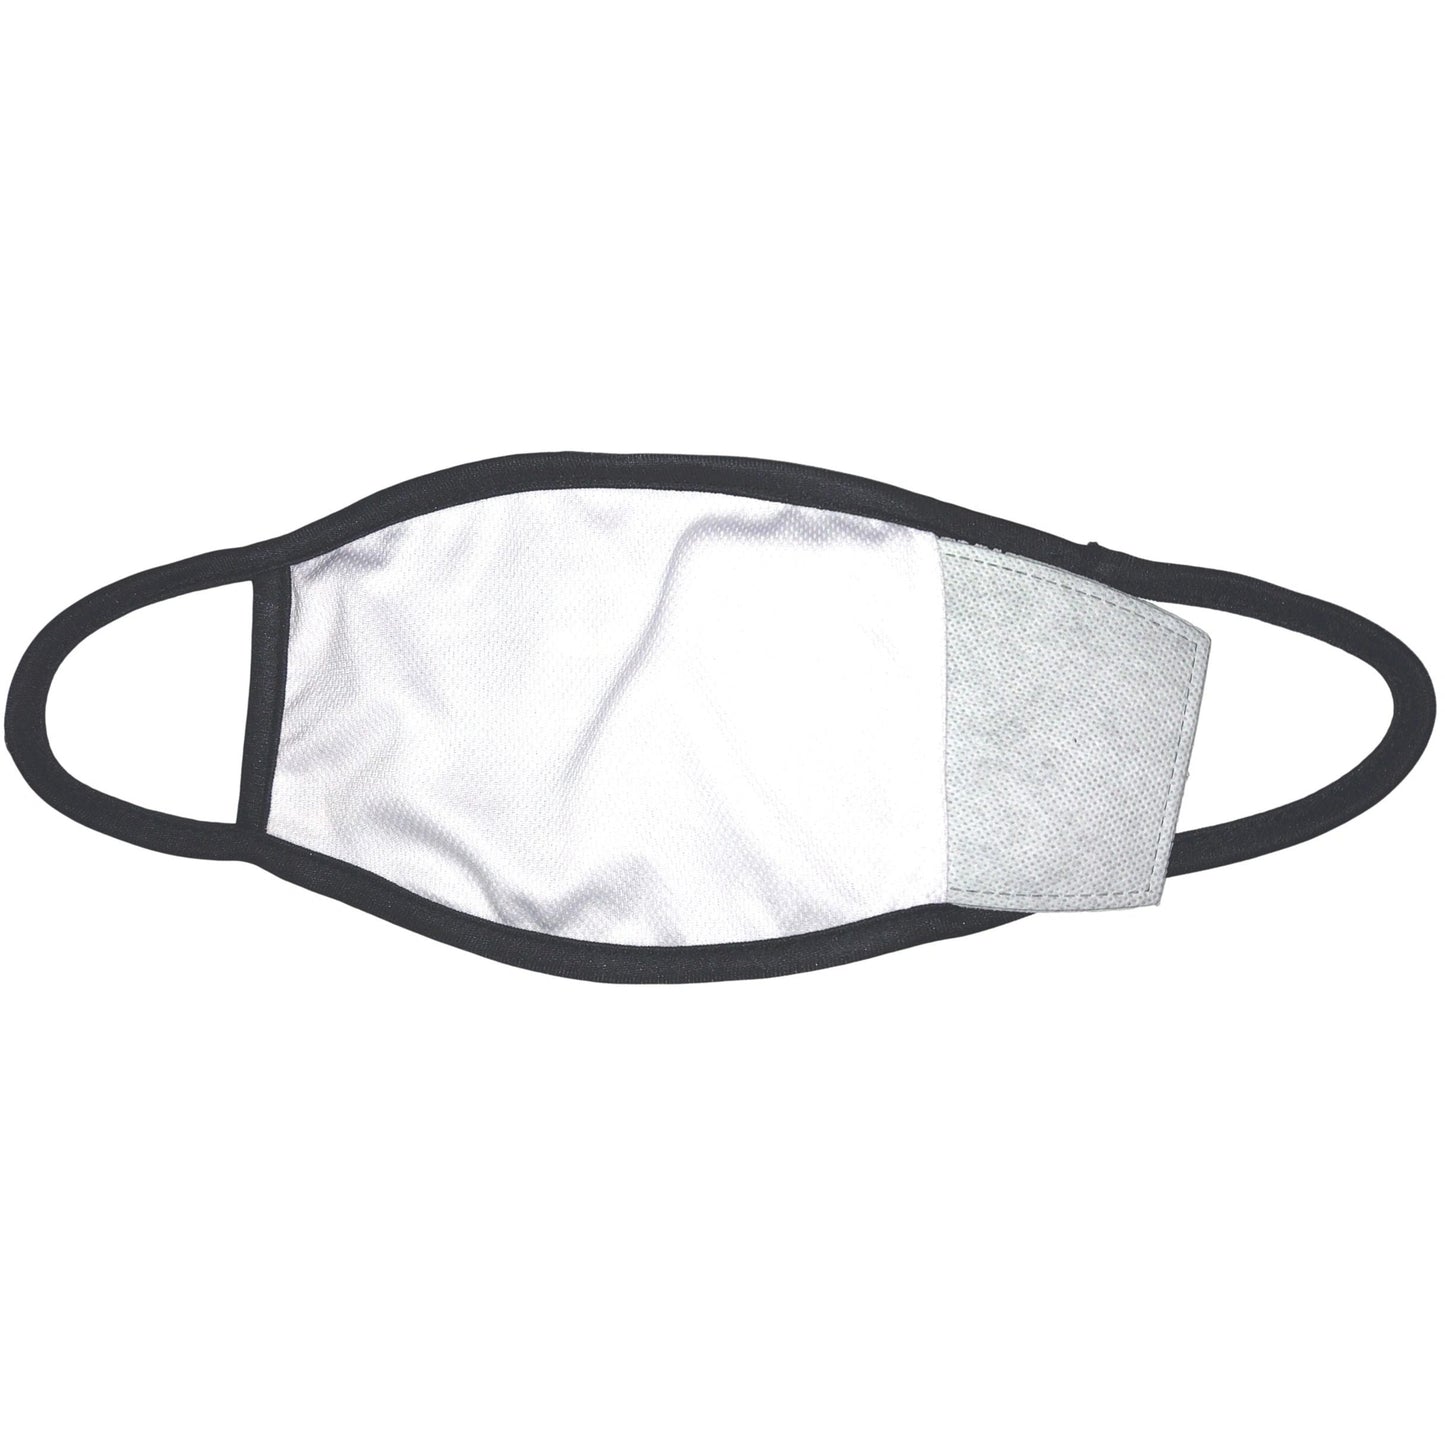 Washable and Reusable PM2.5 Filter Fashion Mask